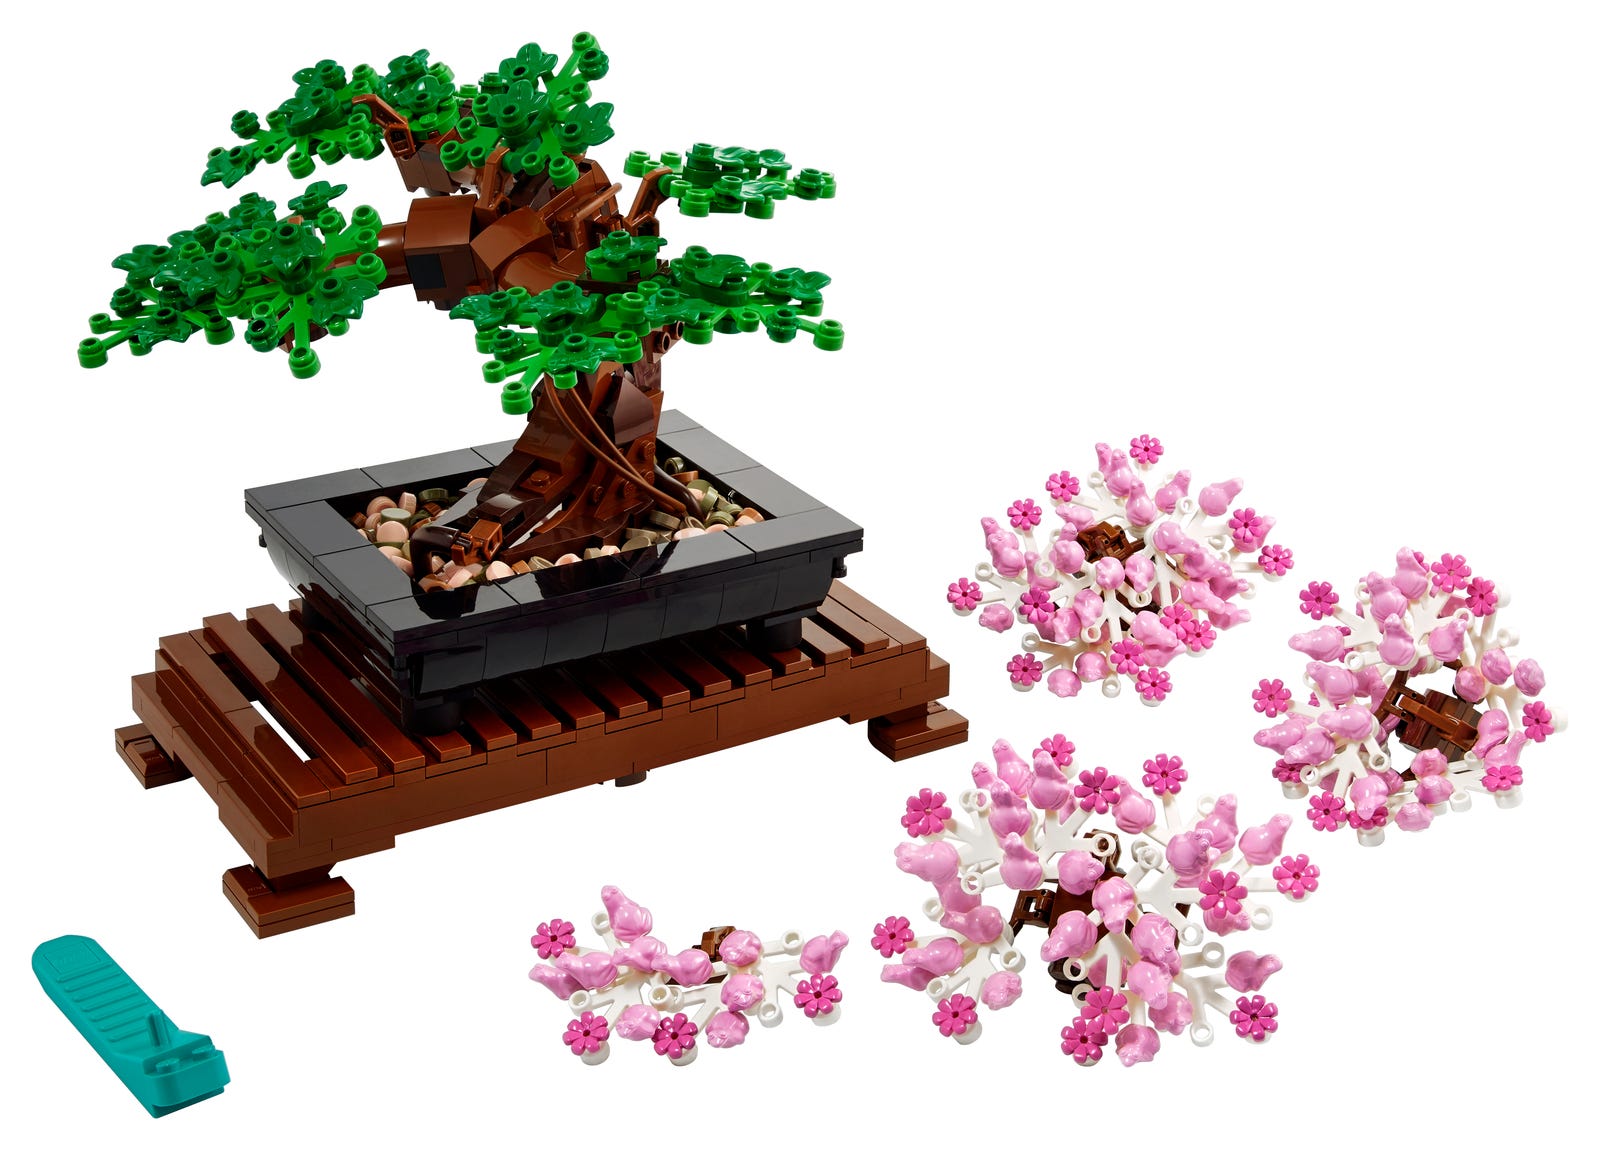 Calming Bonsai Tree LEGO Set with Tiny Frogs and Blossoms